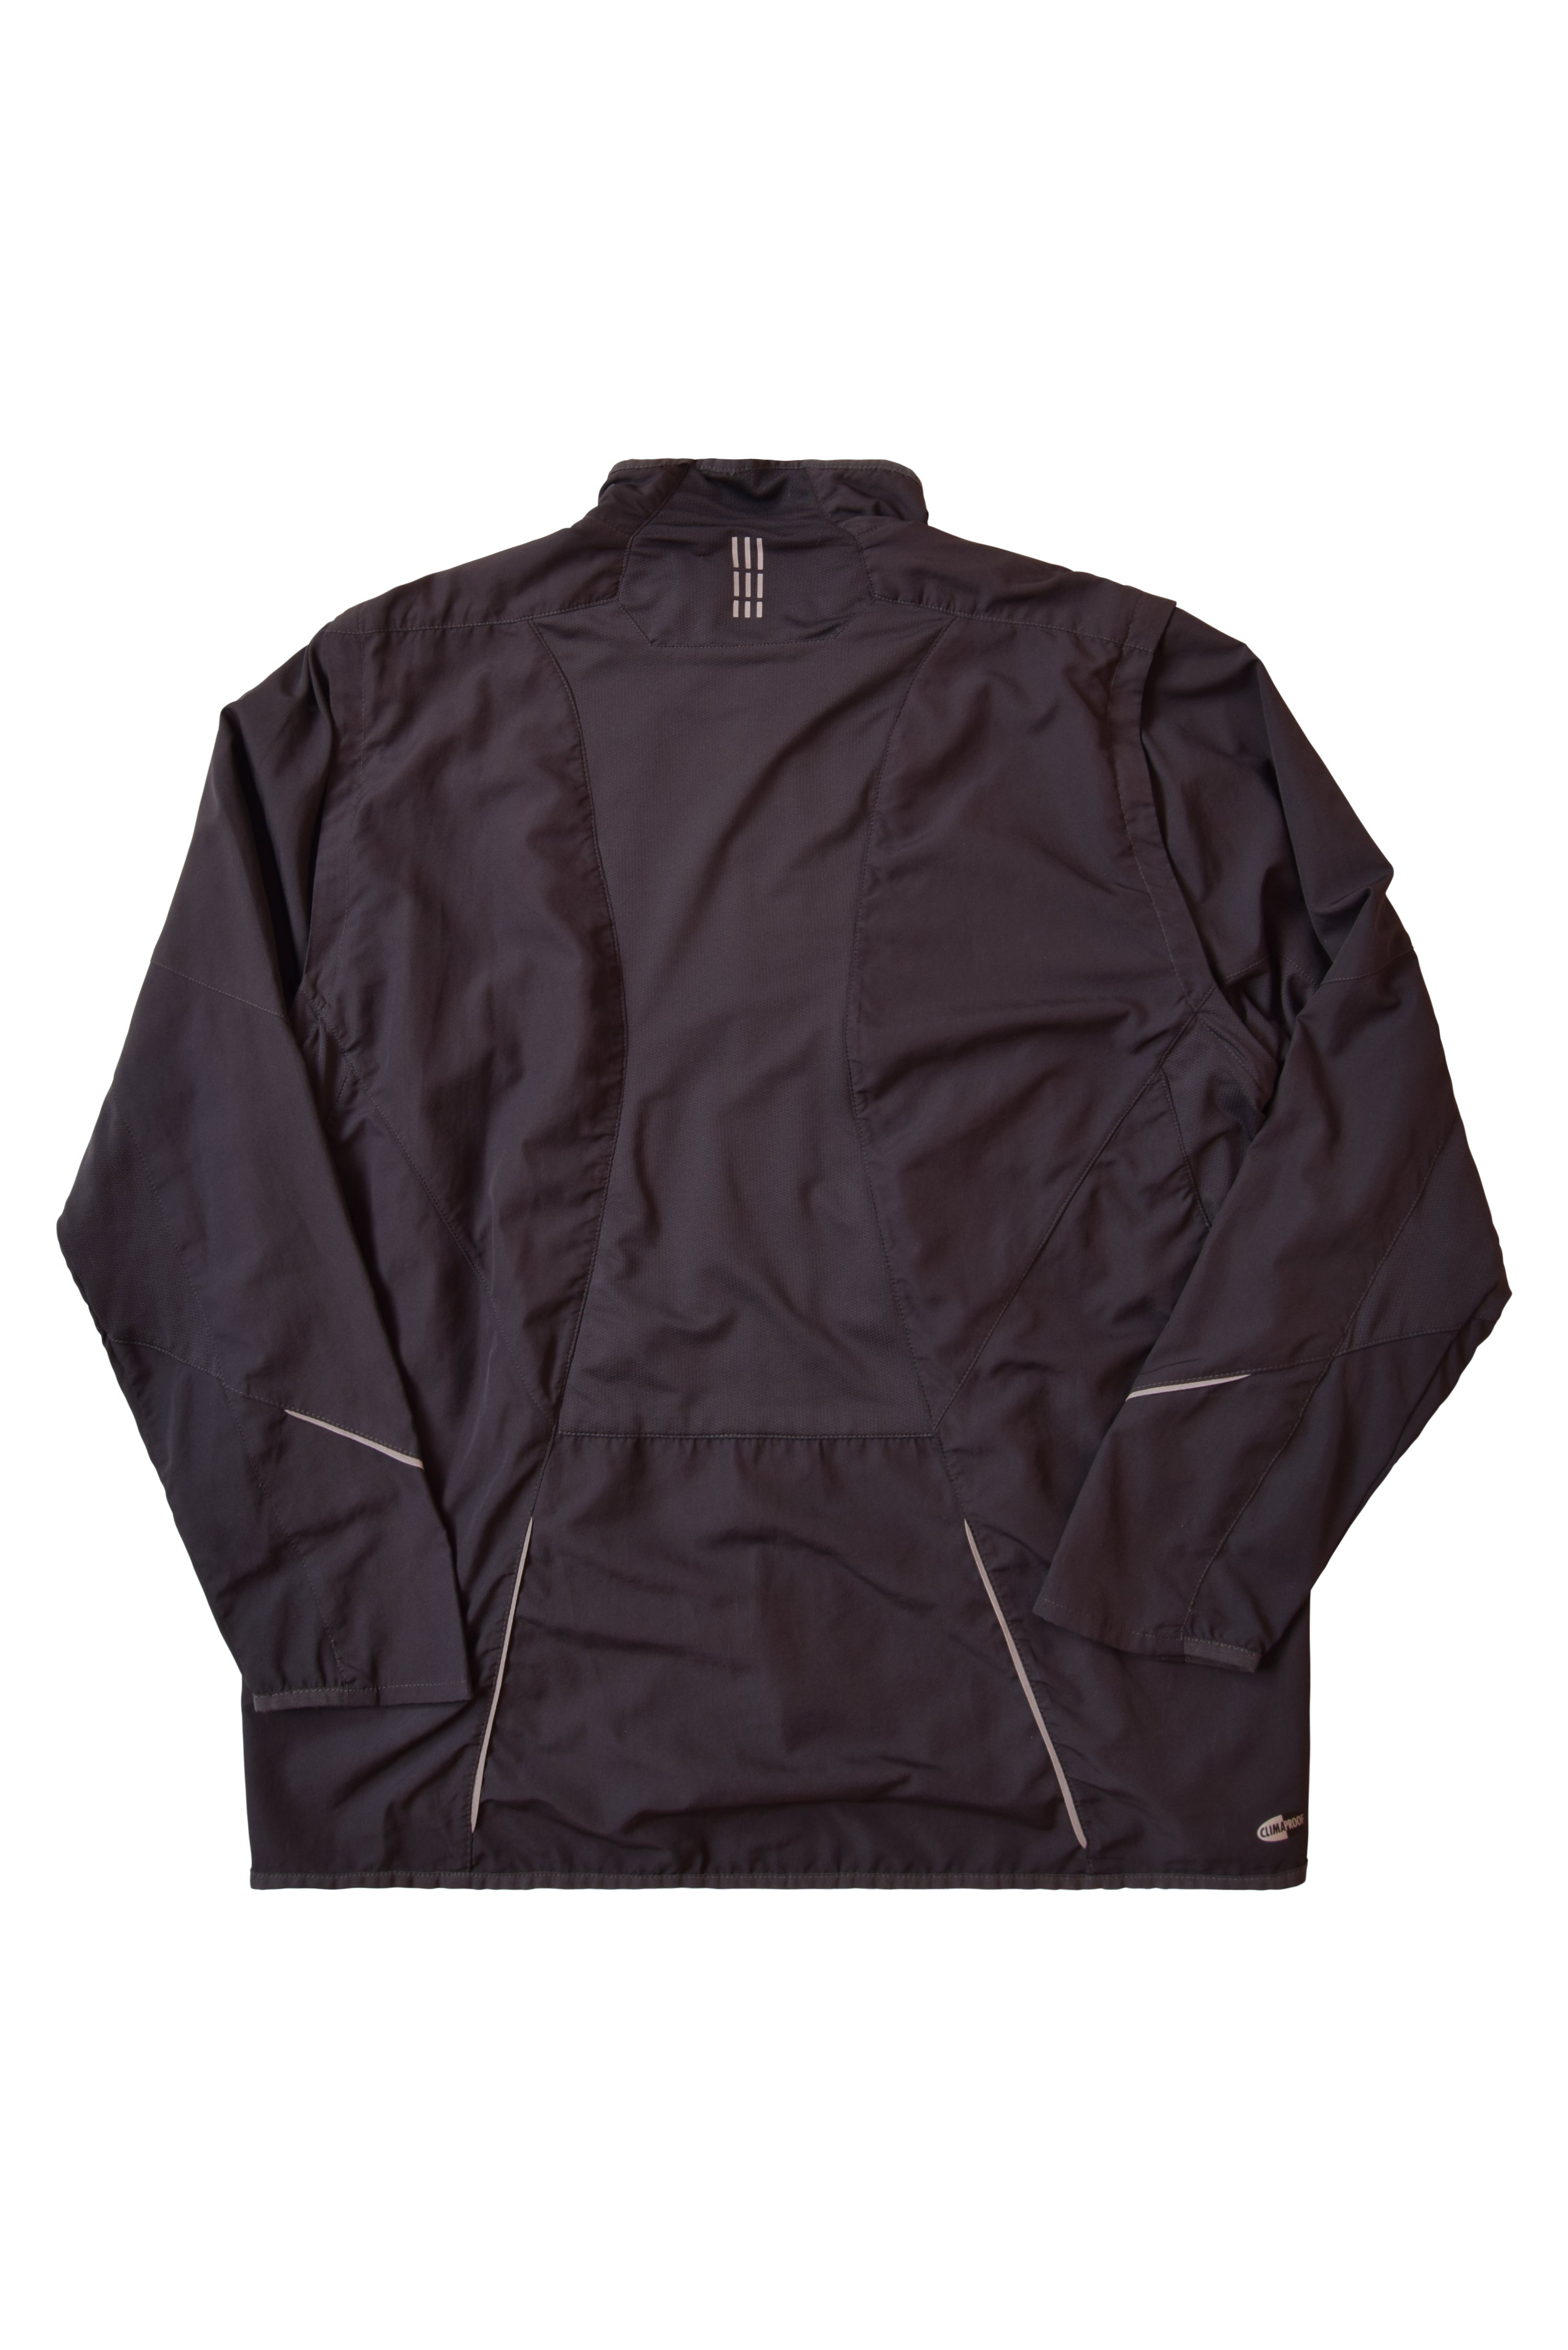 Adidas Response Formotion ClimaProof Jacket '06 with Detachable ...